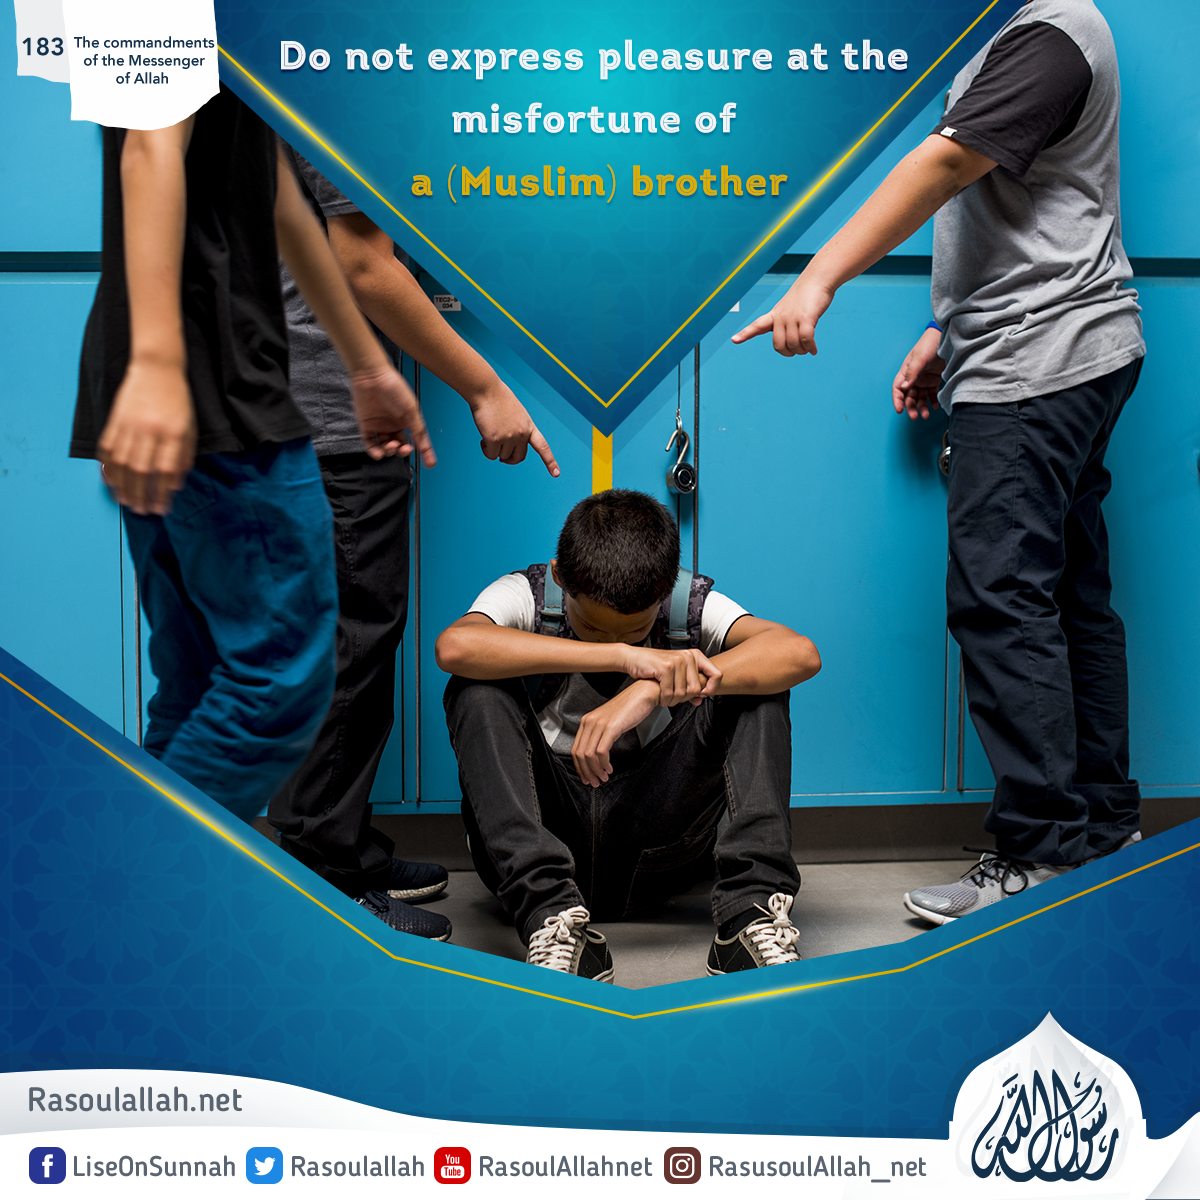 Do not express pleasure at the misfortune of a (Muslim) brother